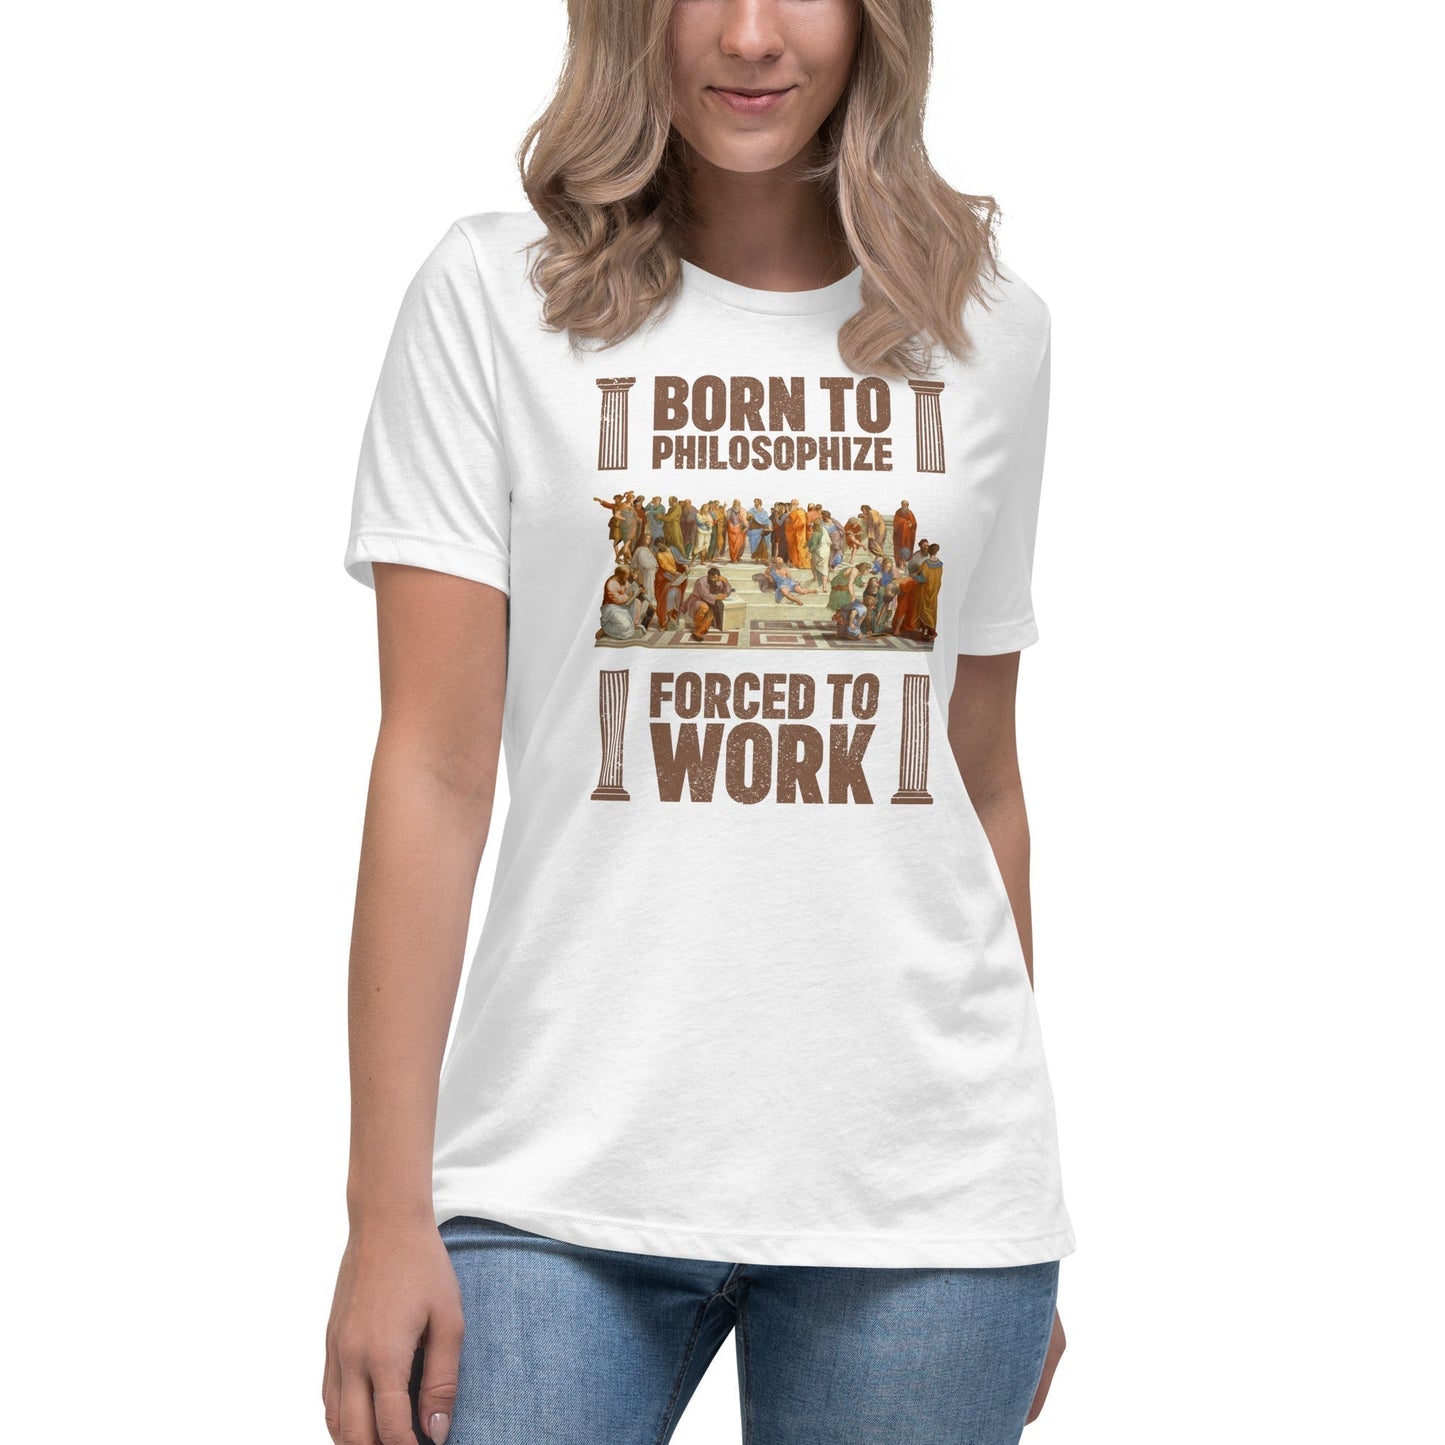 Born To Philosophize - Forced To Work - Women's T-Shirt